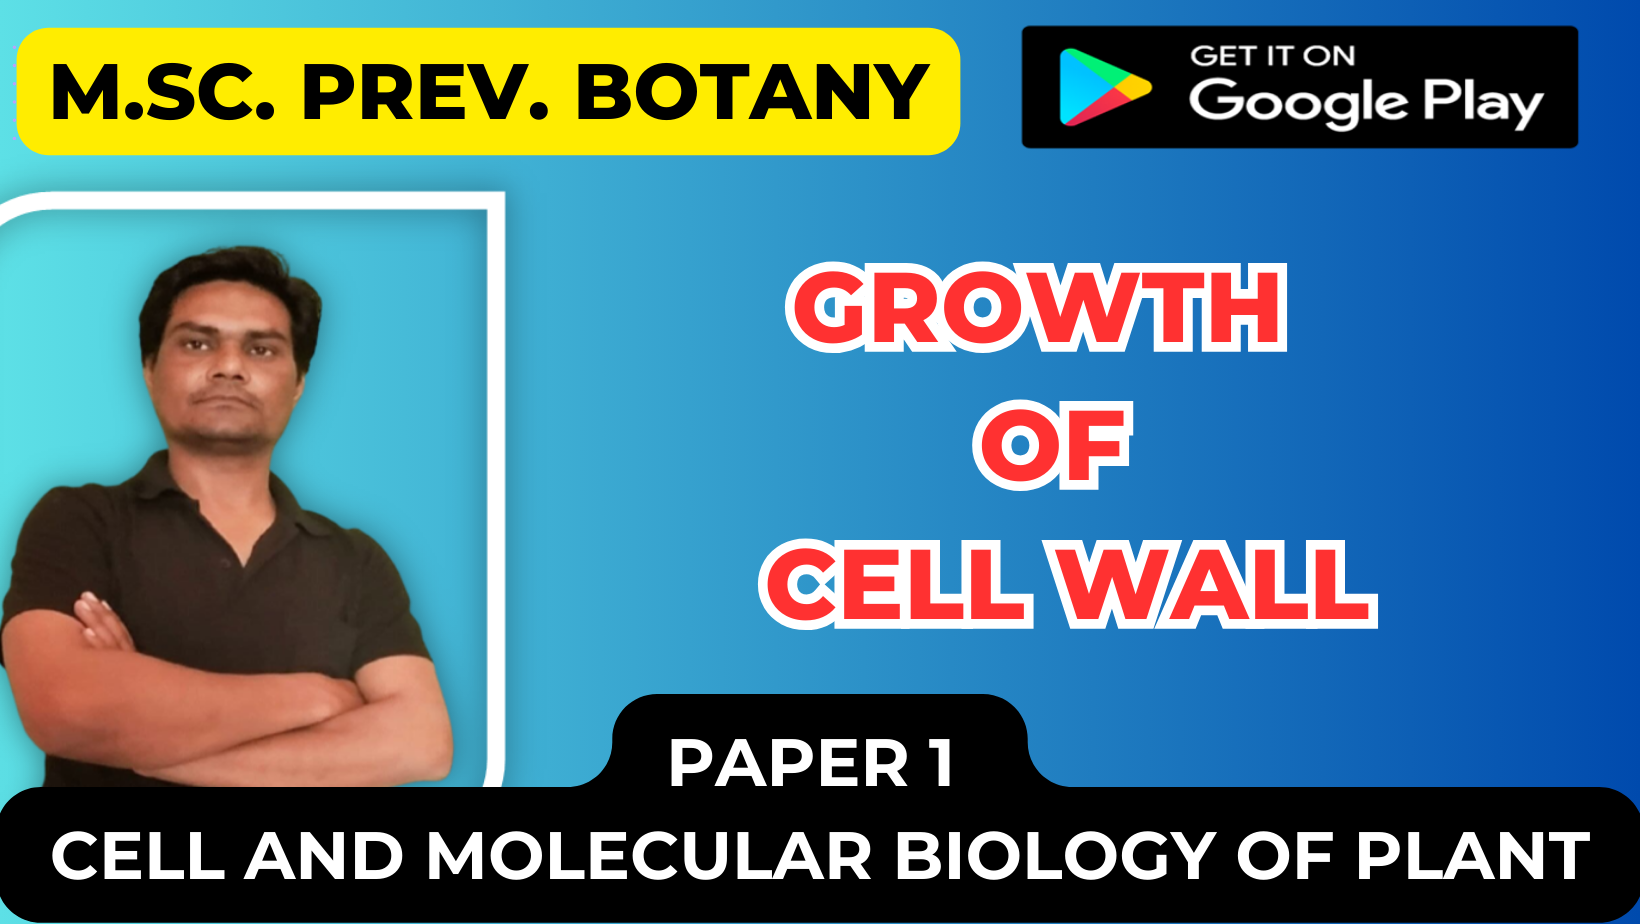 You are currently viewing Growth of cell wall